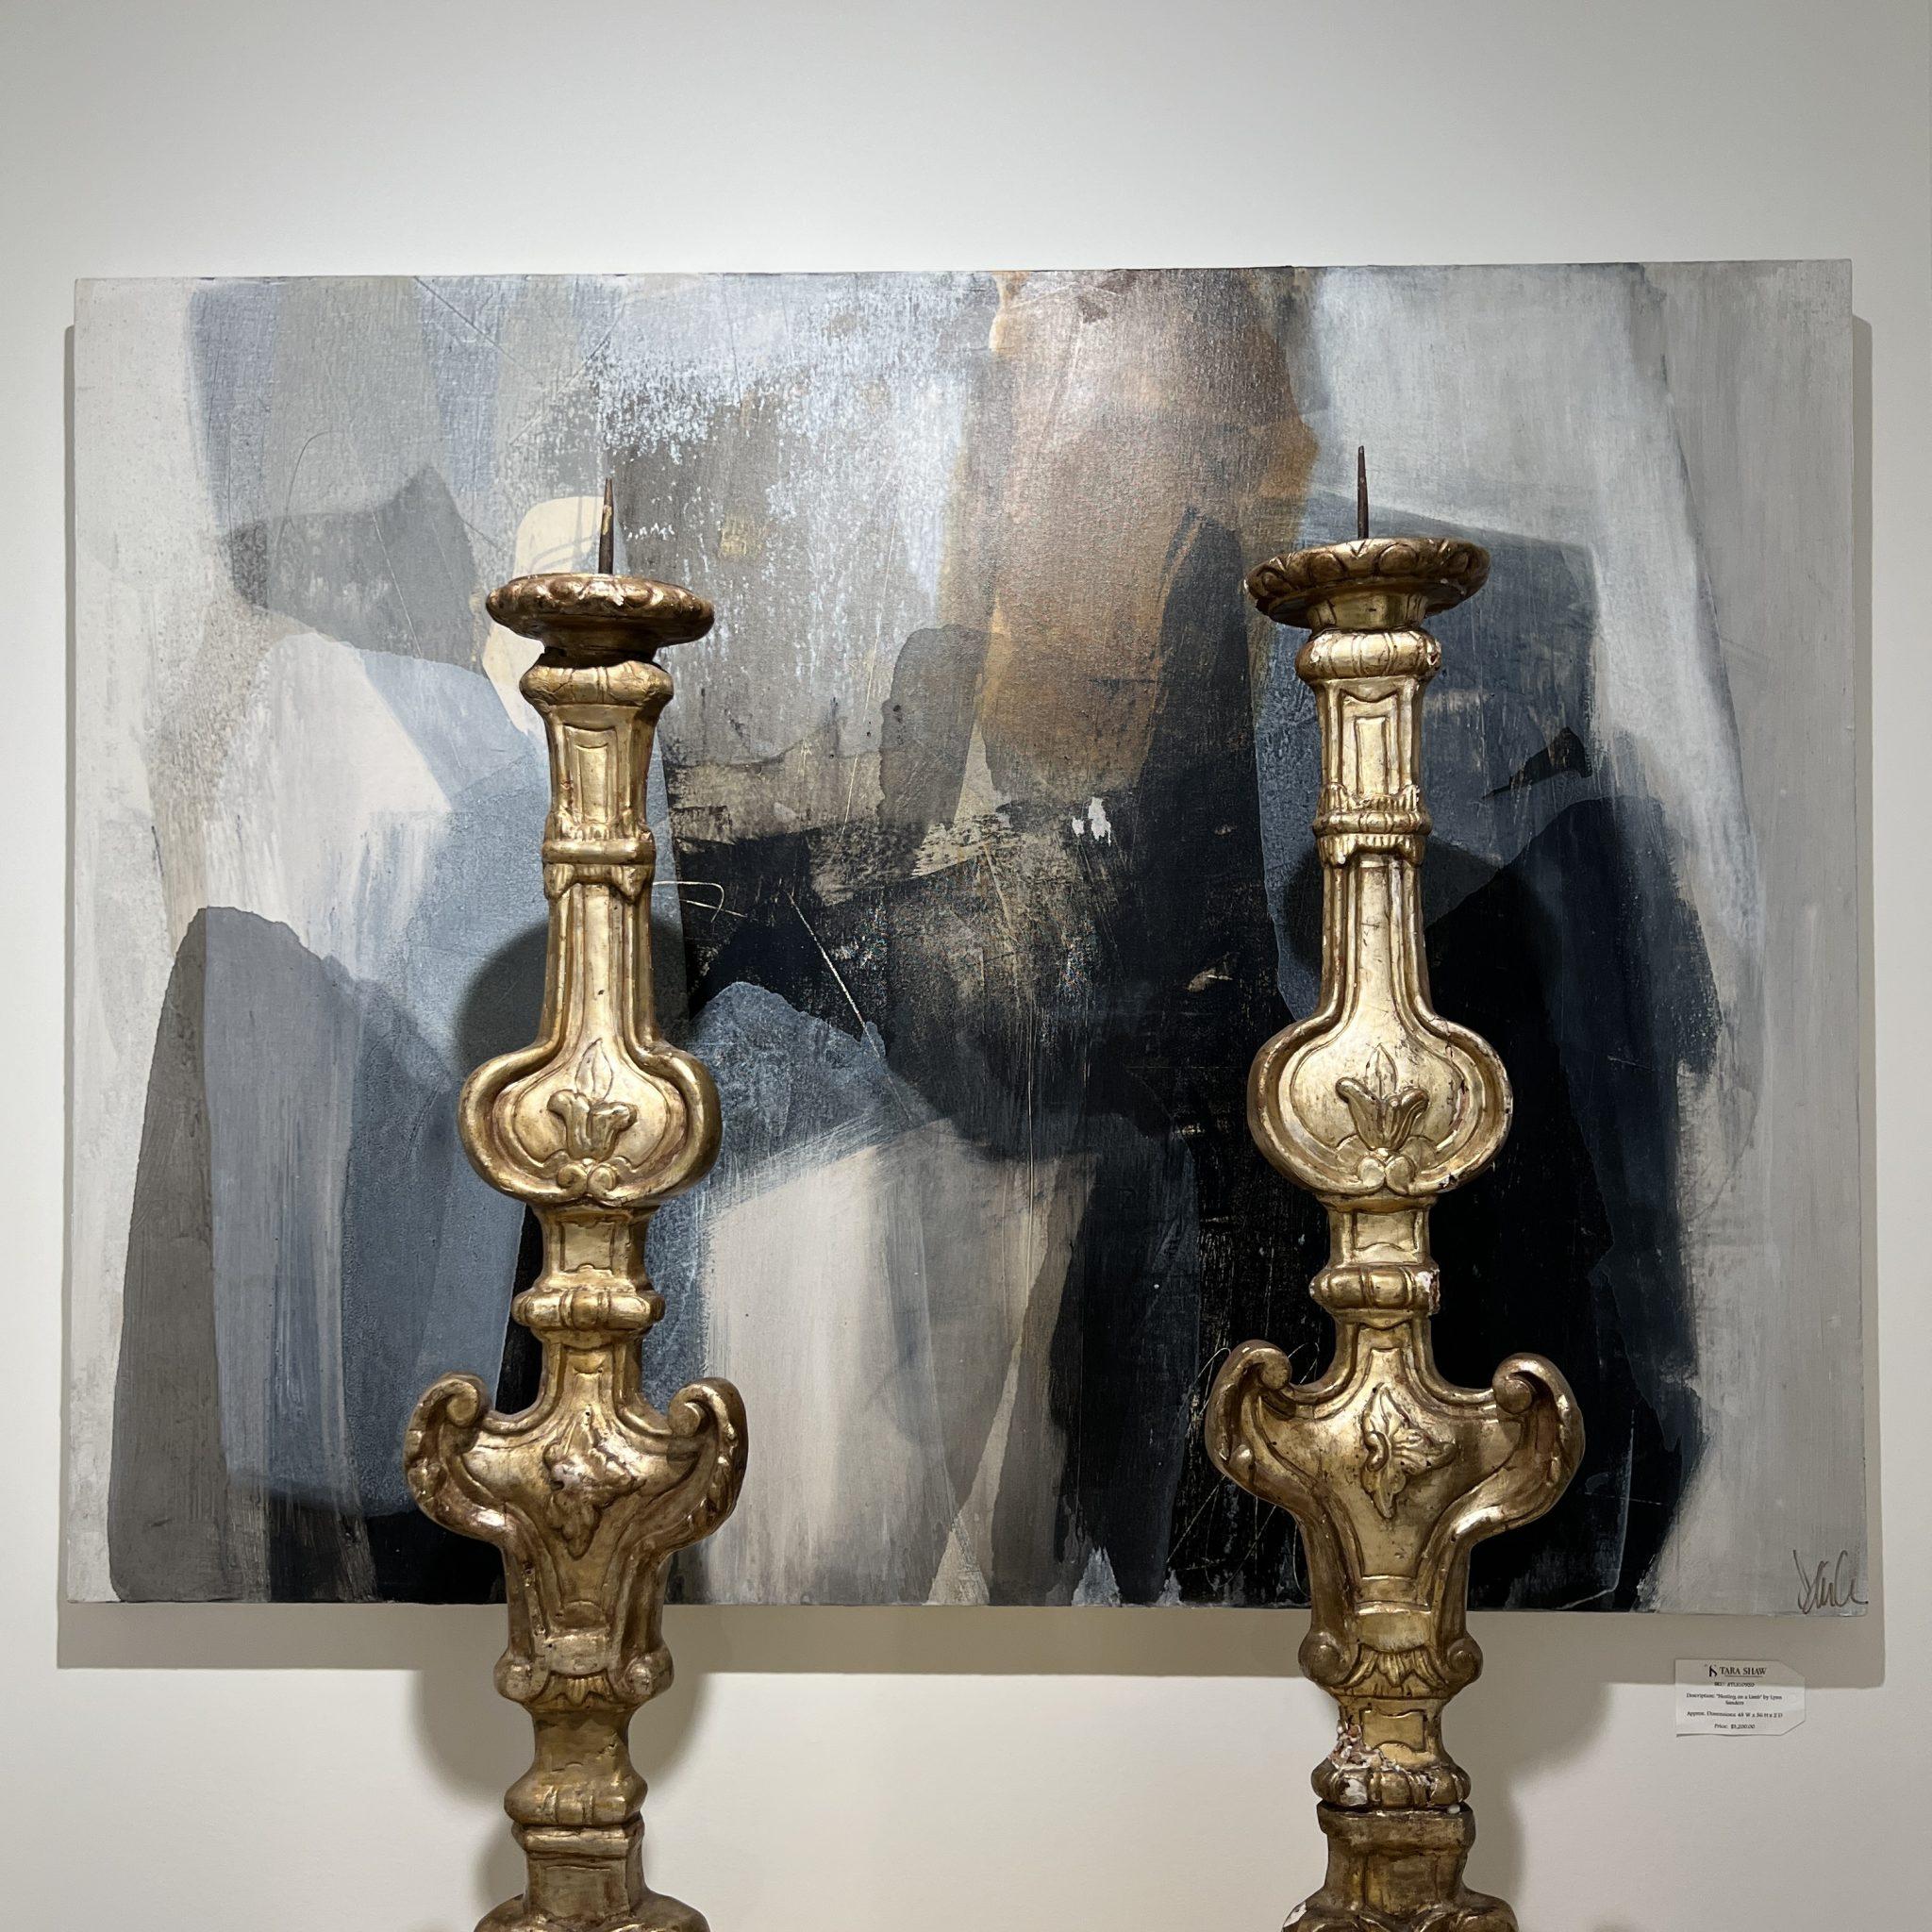 These beautiful candlesticks are an exquisite find. The gold finish adds a nice metallic pop to any space. 